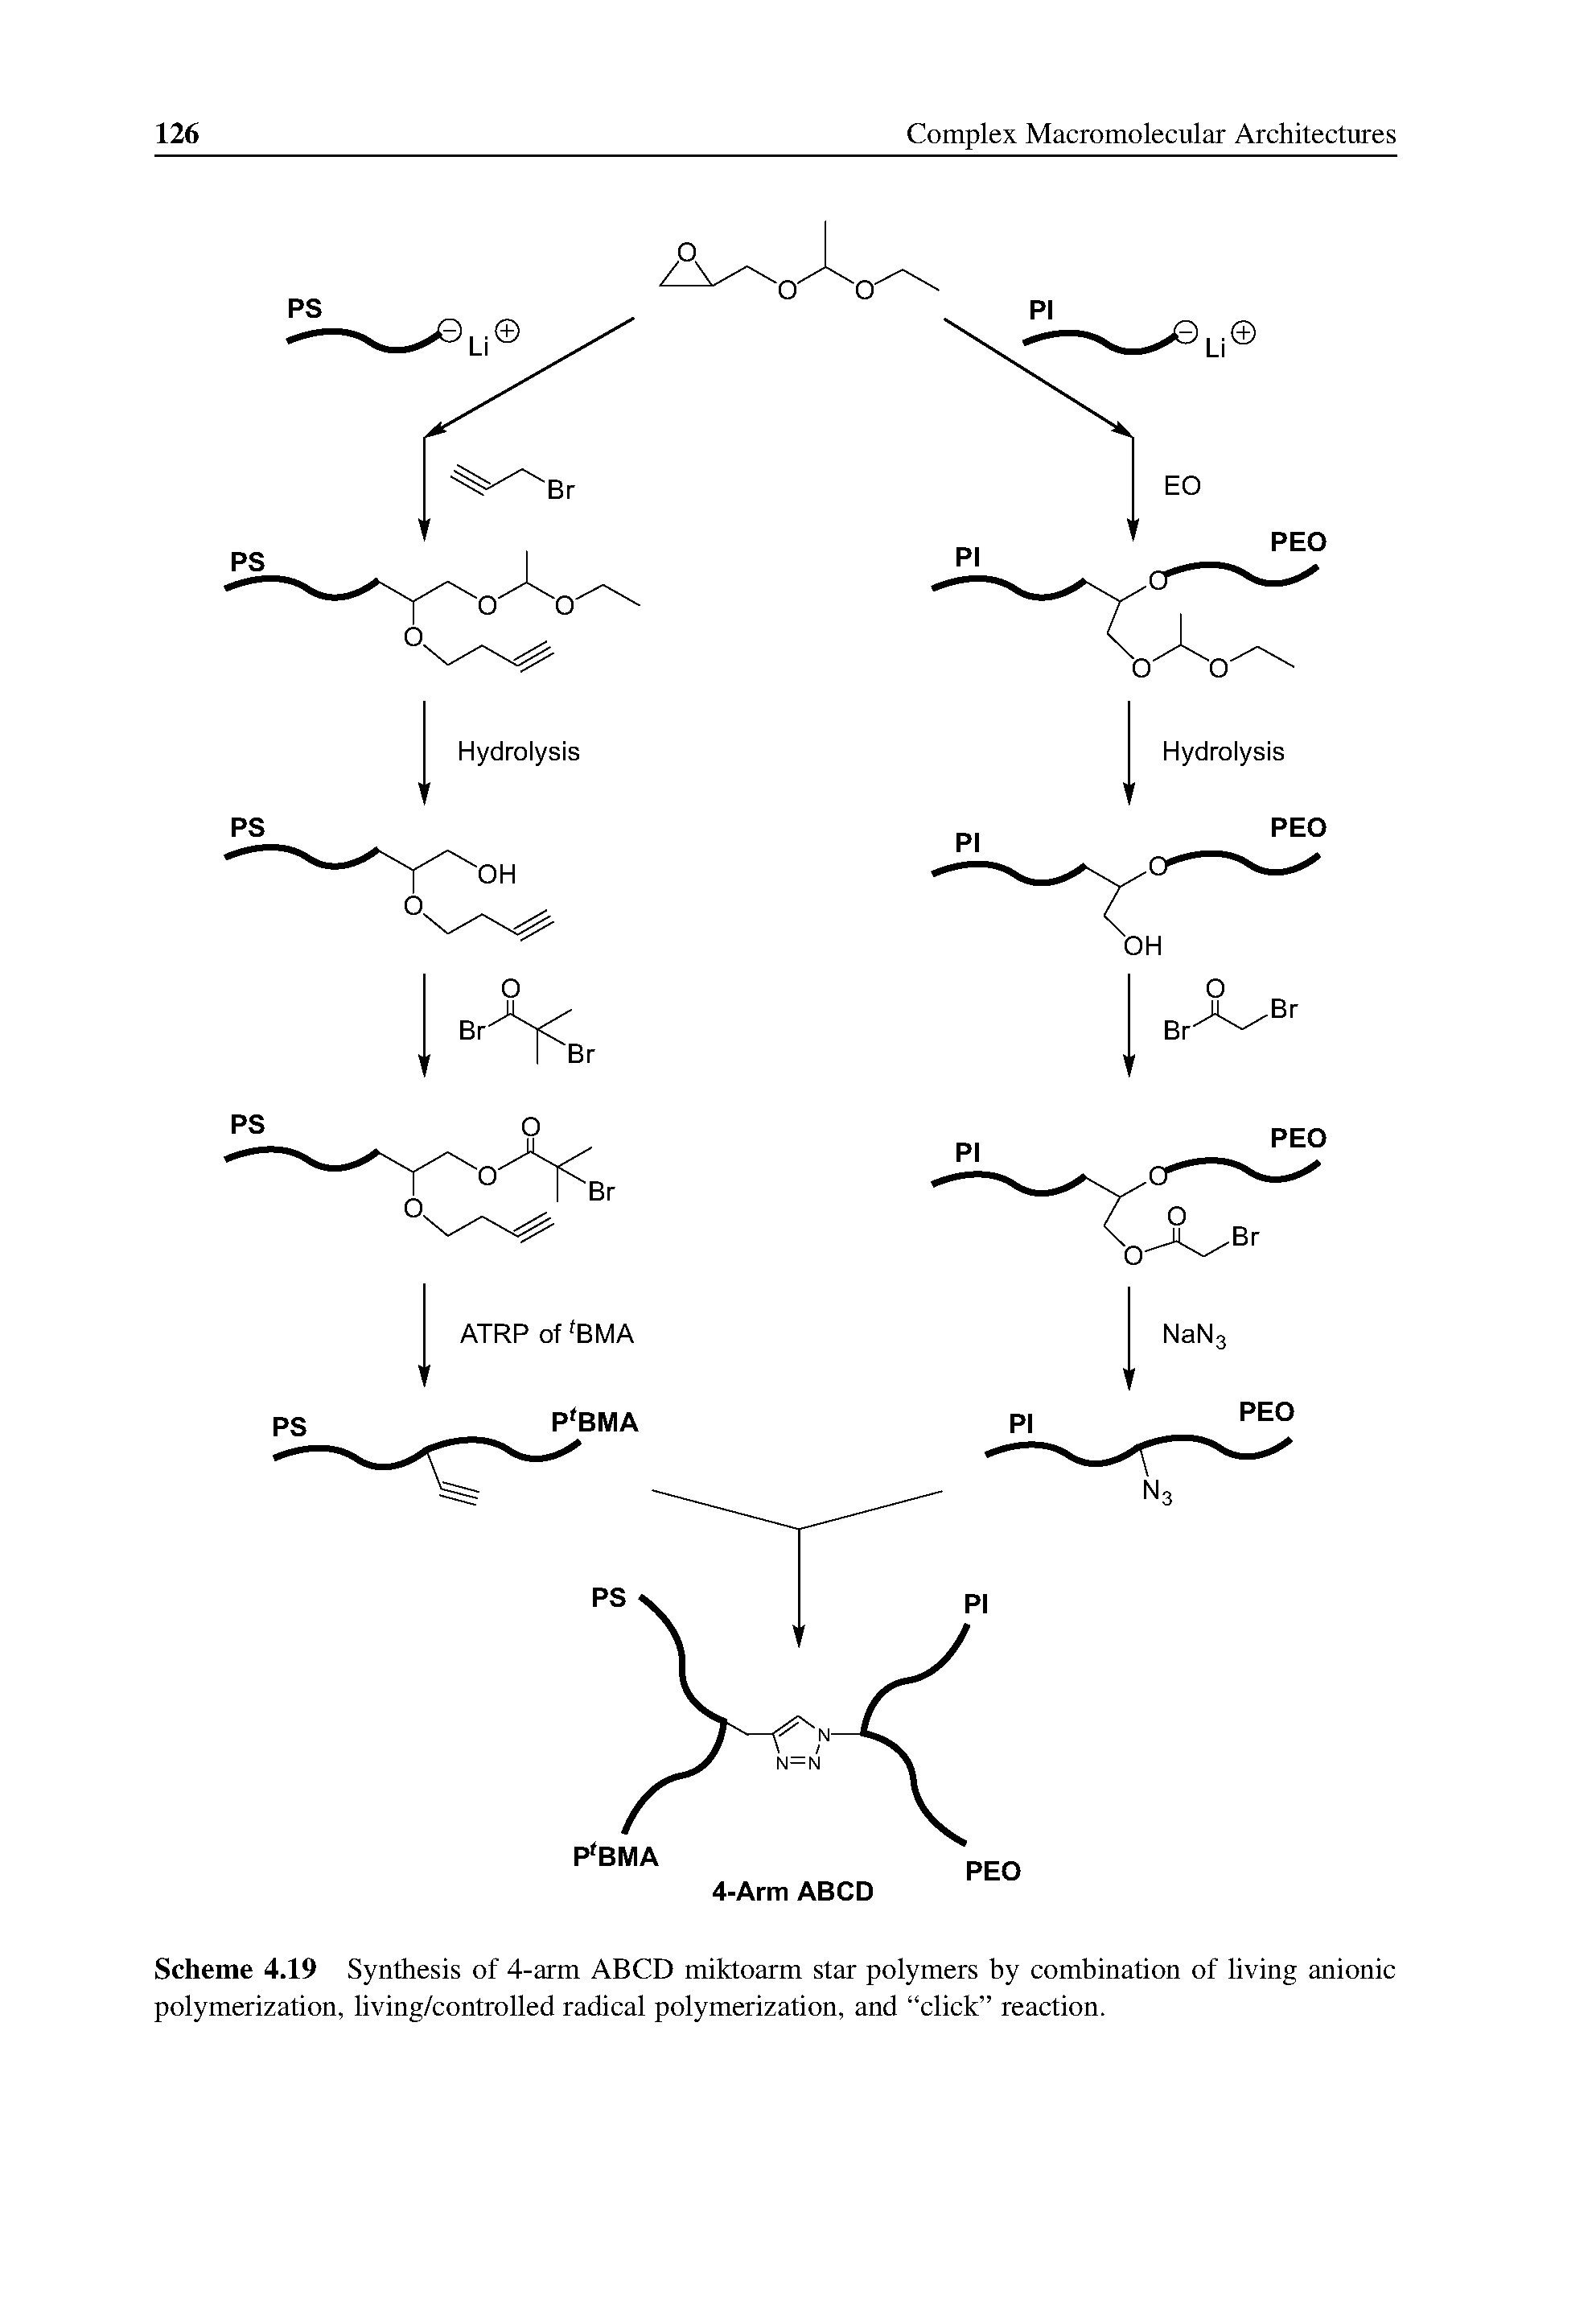 Scheme 4.19 Synthesis of 4-arm ABCD miktoarm star polymers by combination of living anionic polymerization, living/controlled radical polymerization, and click reaction.